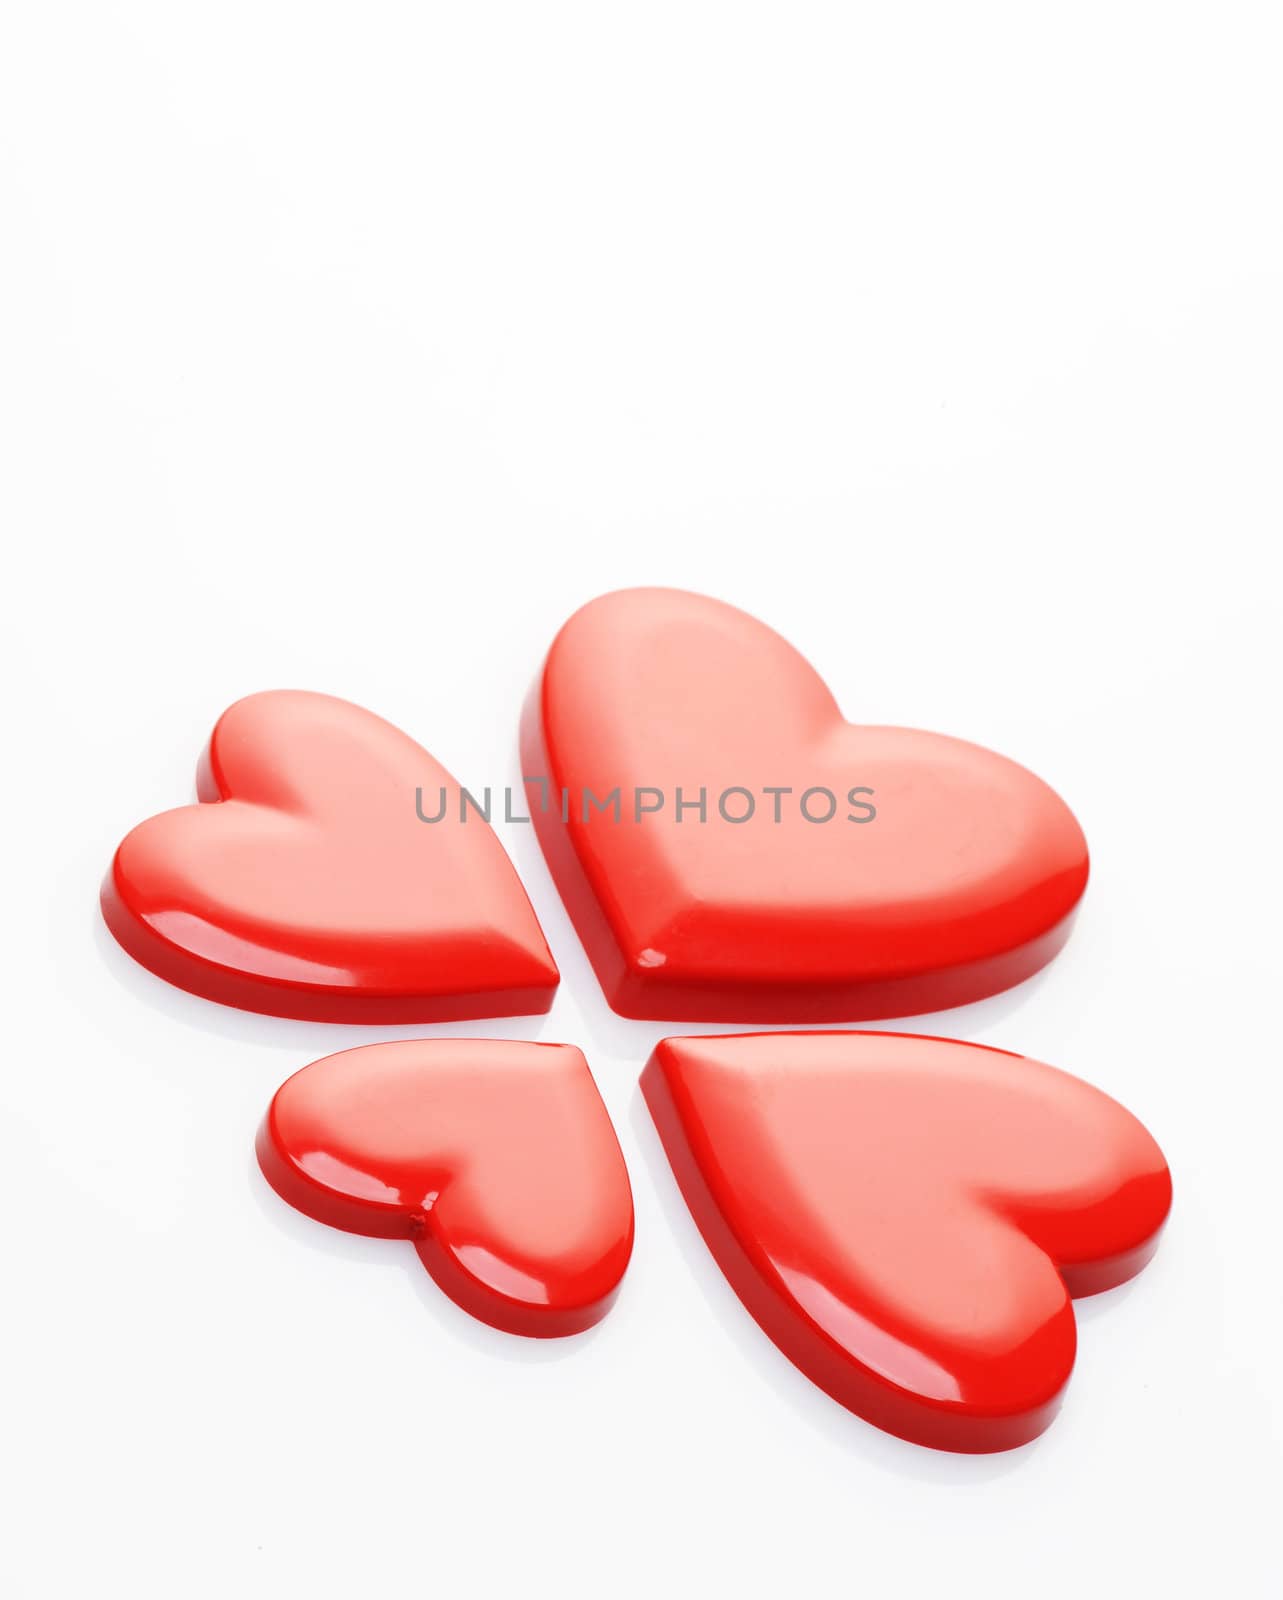 red hearts on white background by stokkete